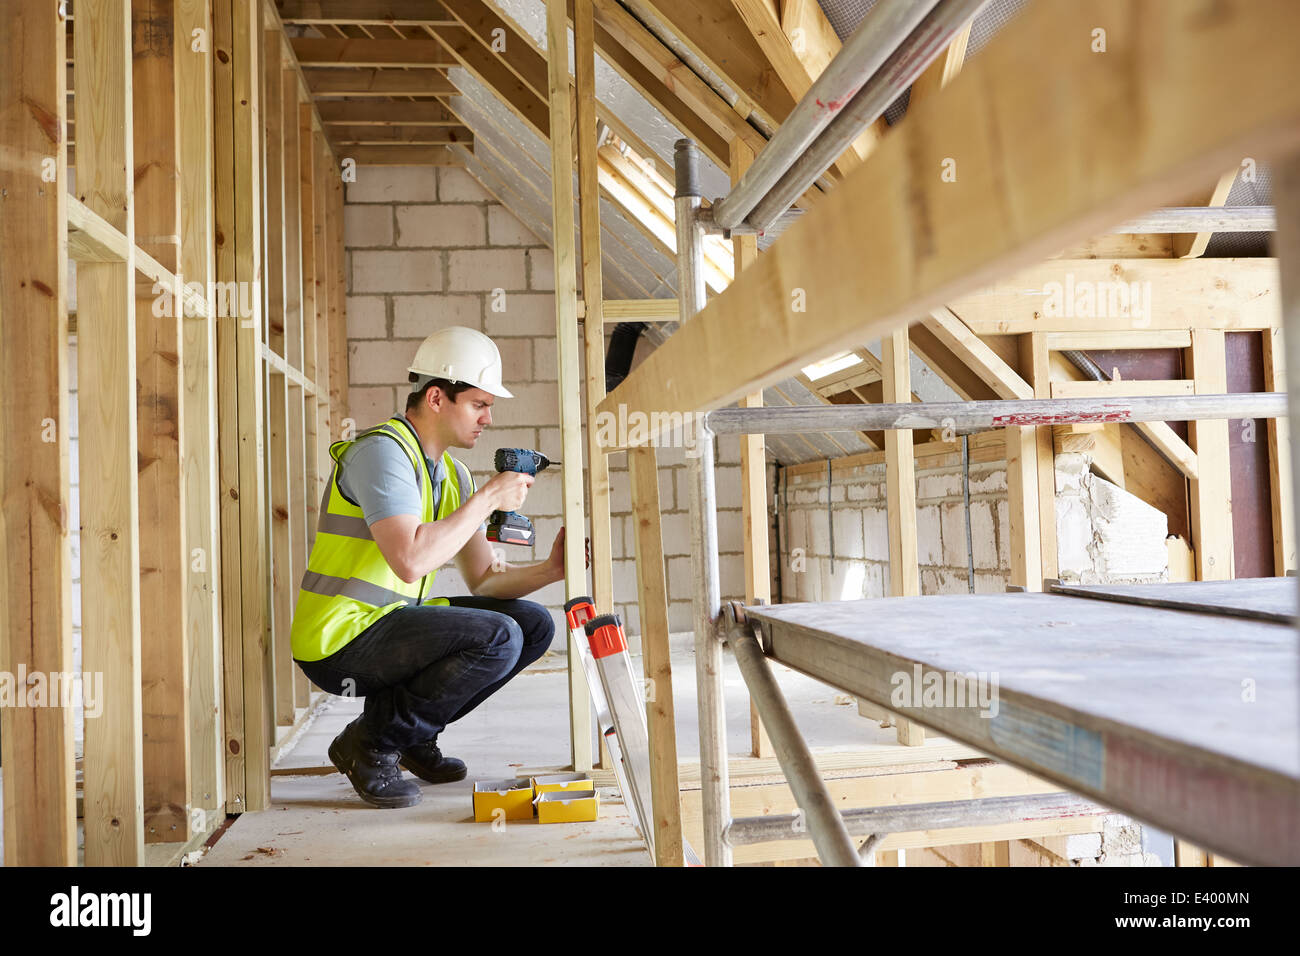 Construction Worker Using Drill On House Build Stock Photo